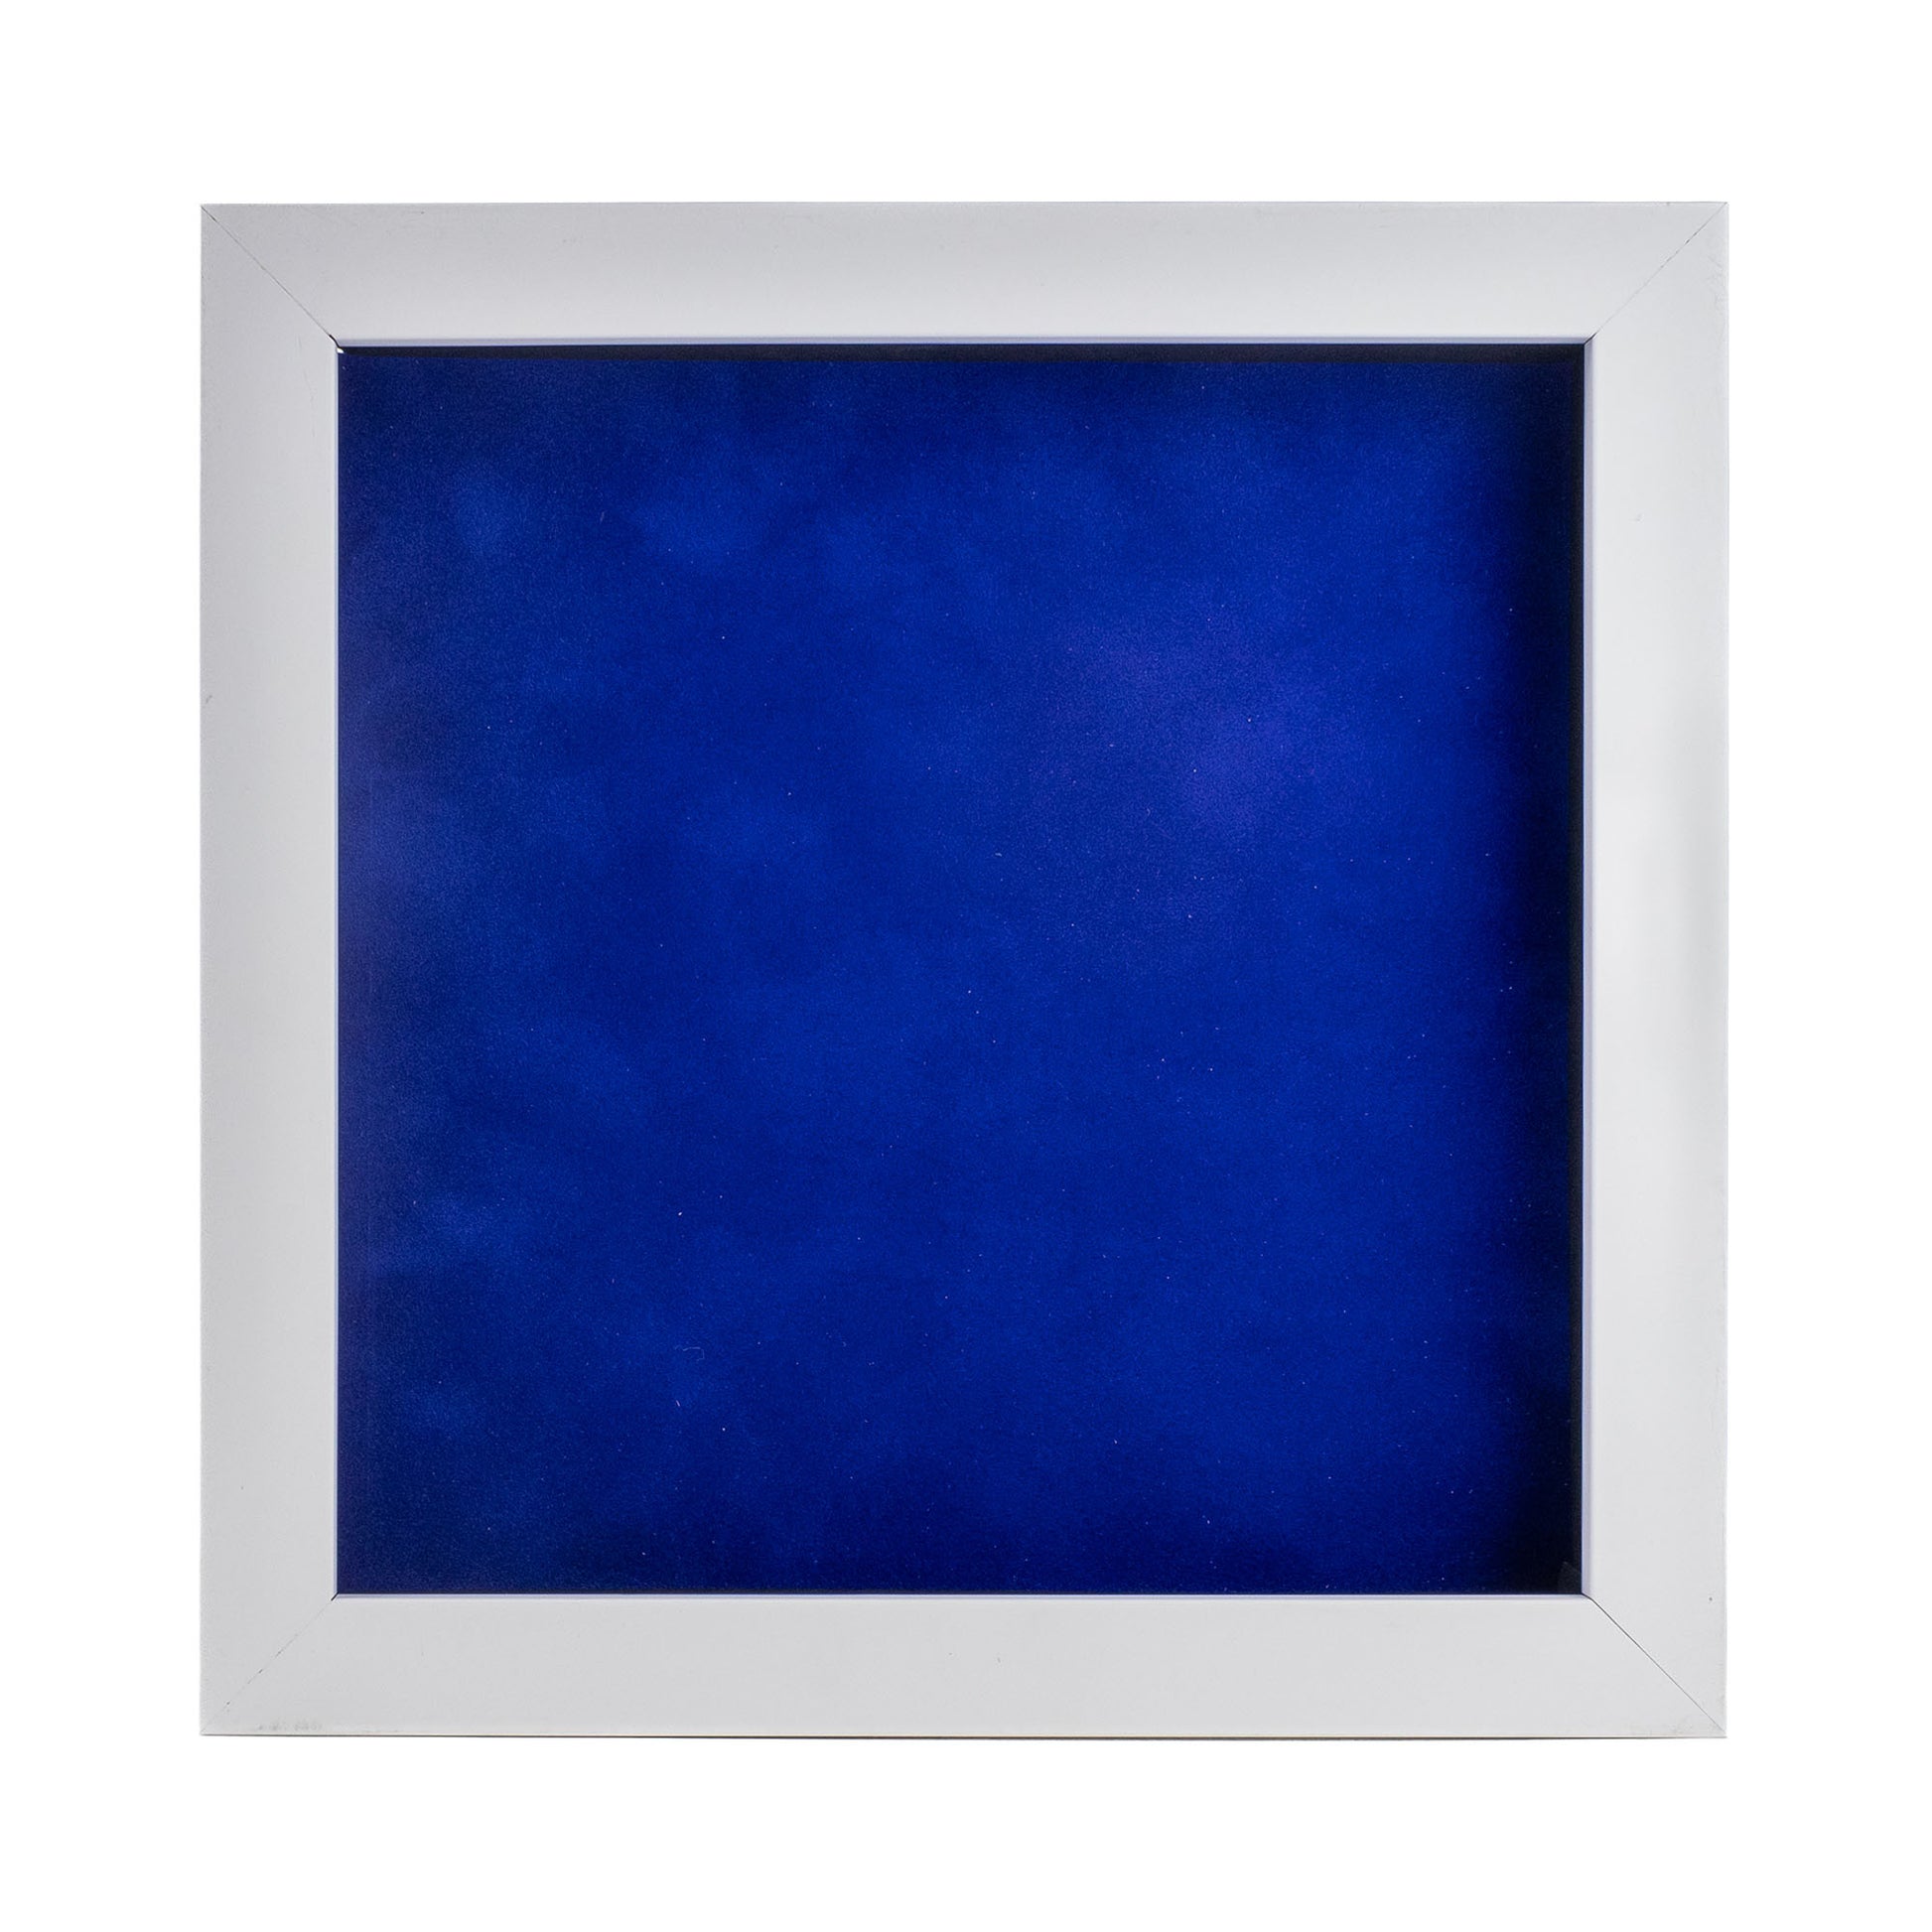 30x30 Shadow Box Frame Dark Gray Finish | 1 Depth of Usable Space|  Vertical or Horizontal Display | Interior Size 30x30 Inches| UV Resistant  Acrylic